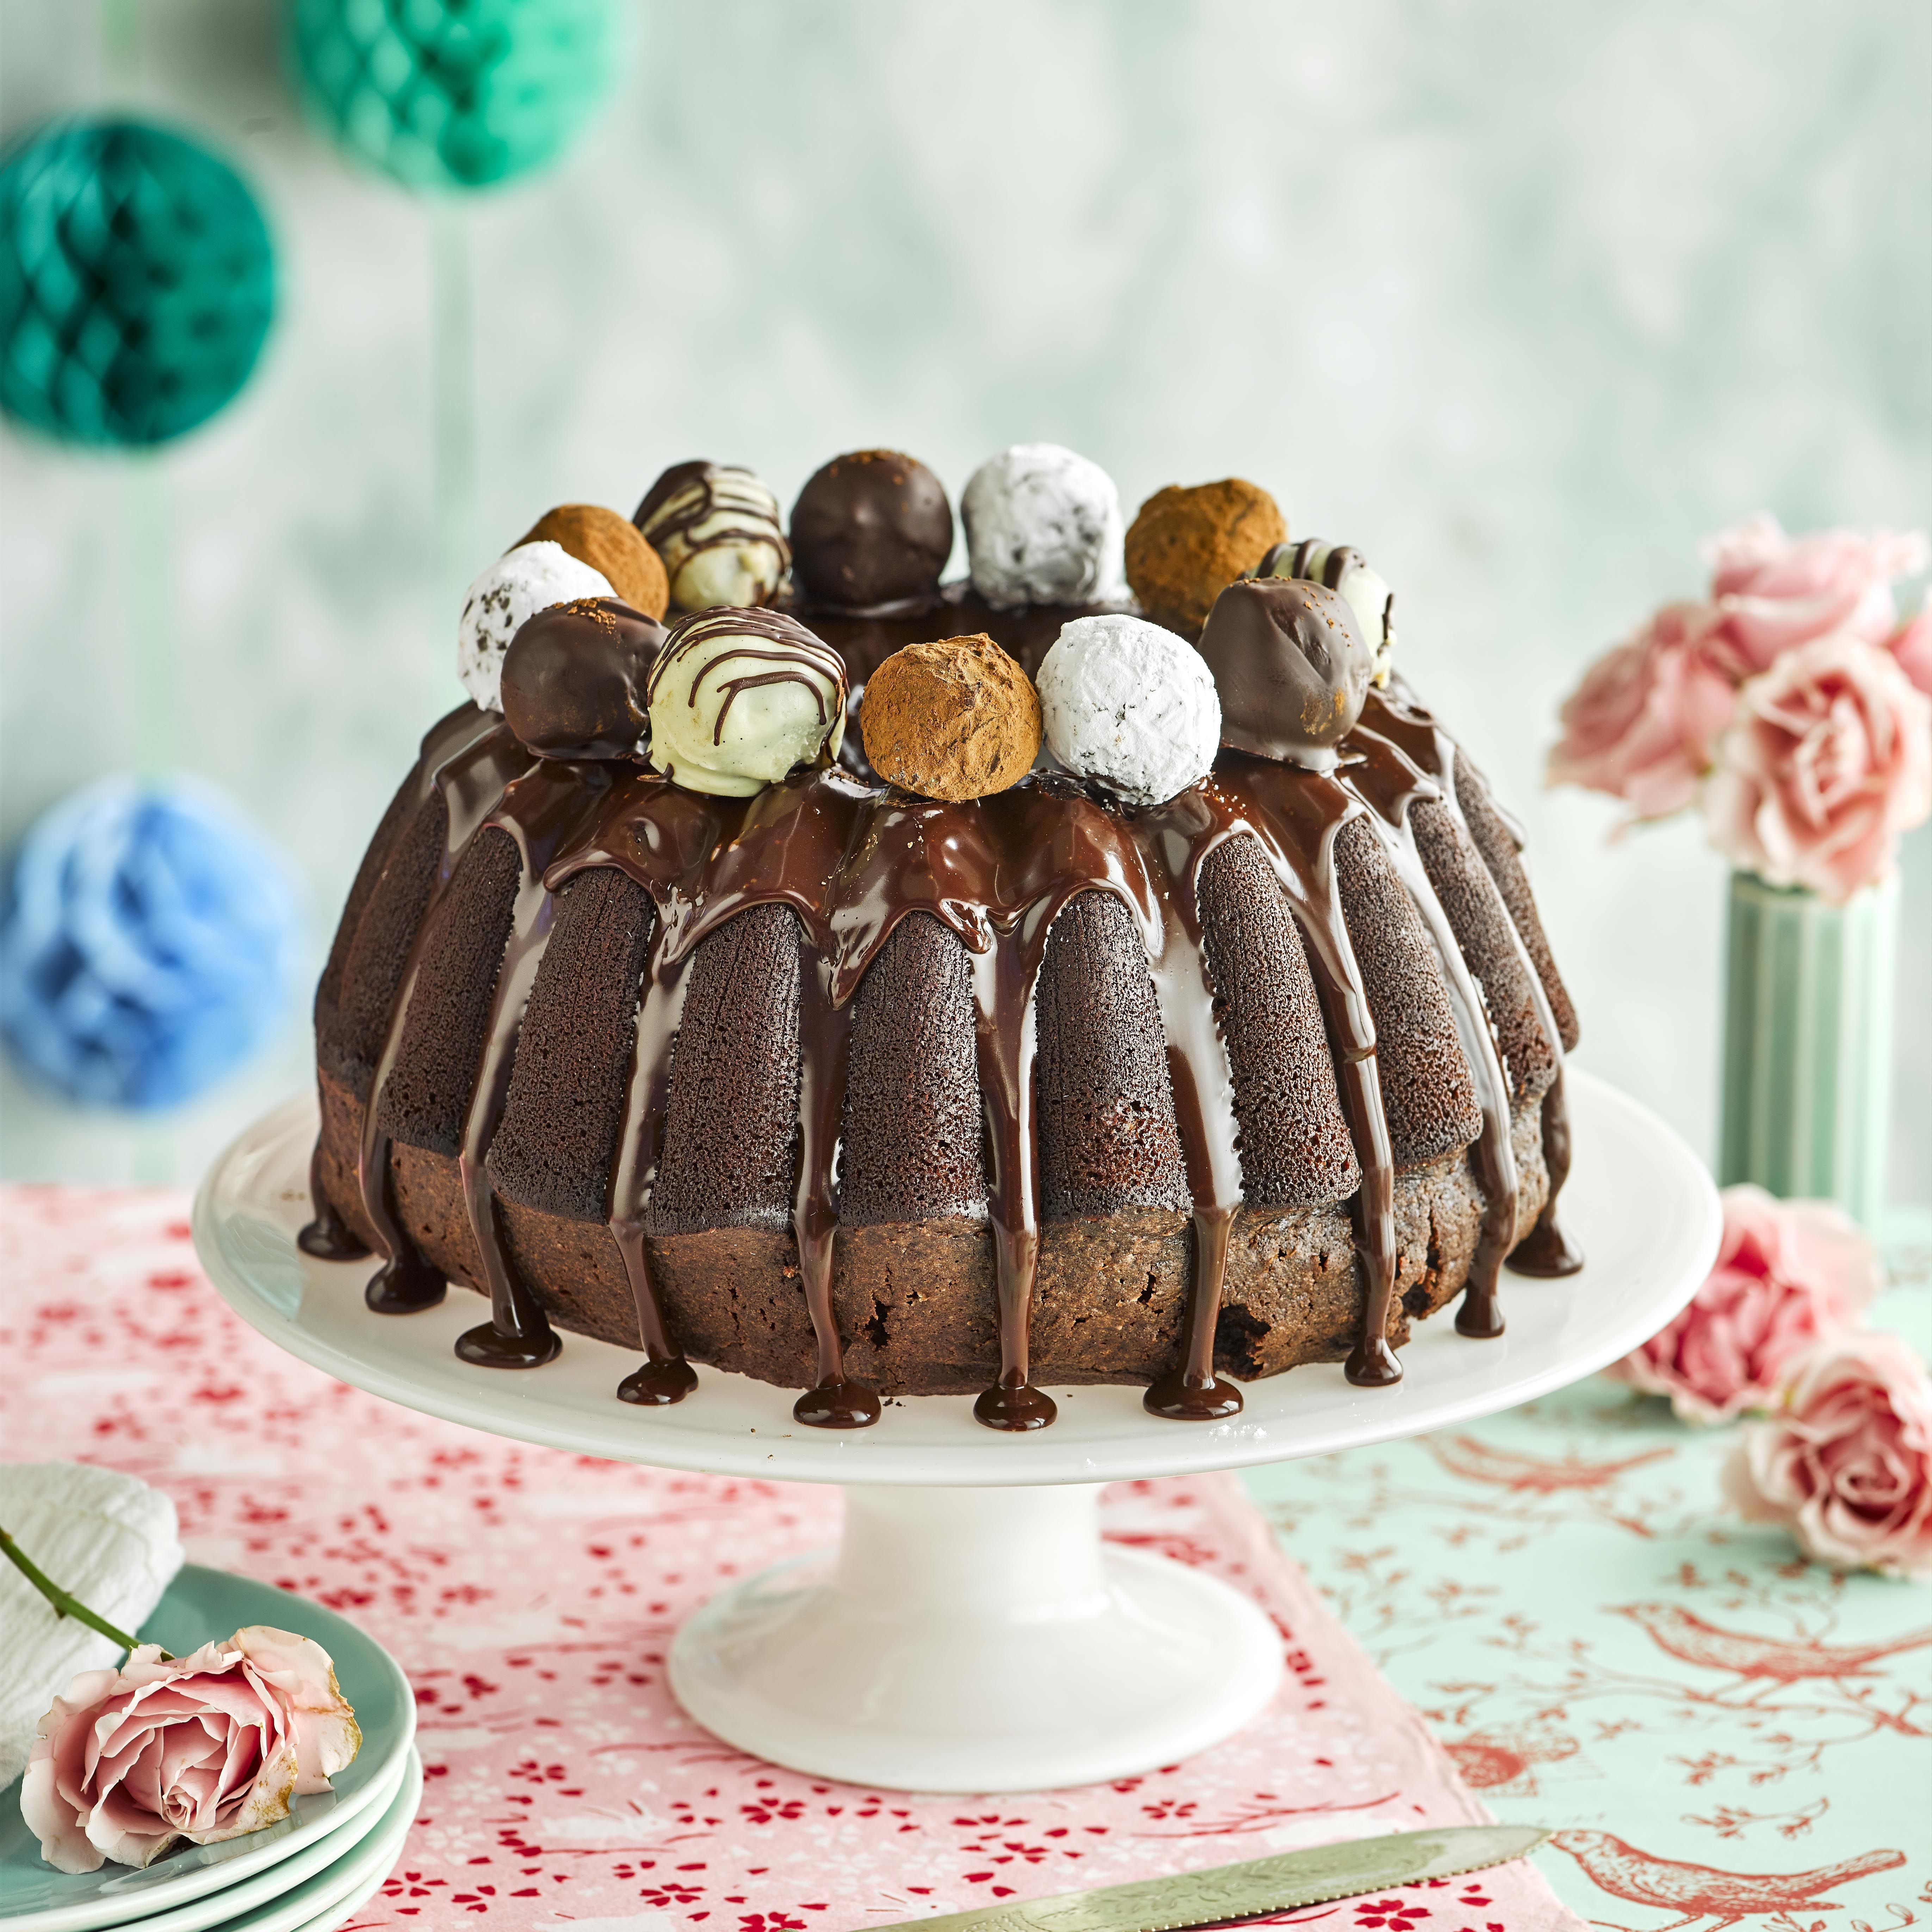 Stunning chocolate bundt cake decorating ideas to Impress Your Guests